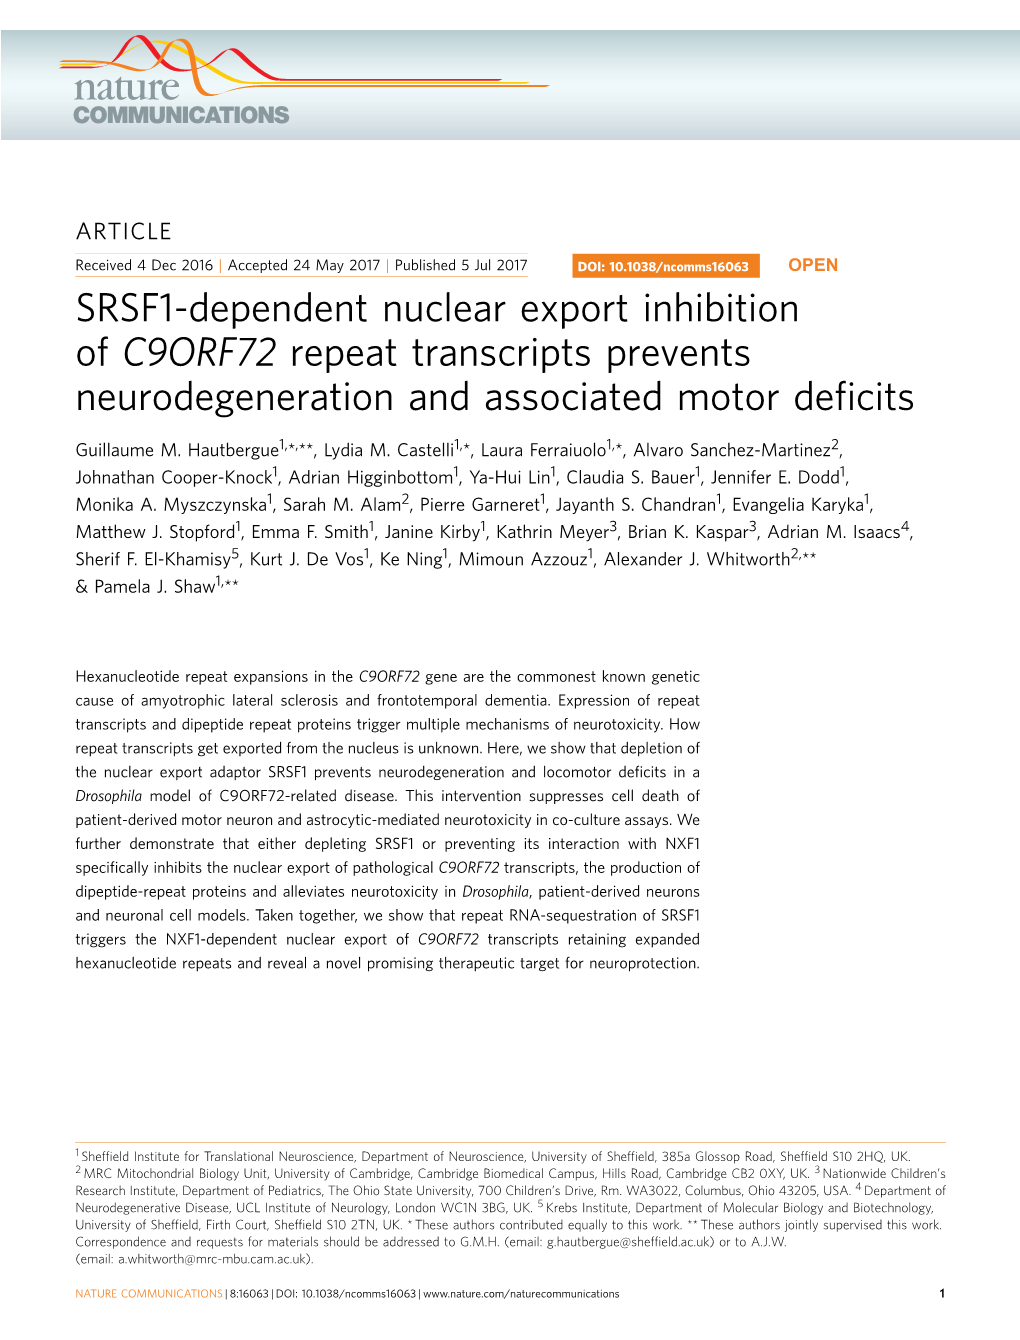 SRSF1-Dependent Nuclear Export Inhibition of C9ORF72 Repeat Transcripts Prevents Neurodegeneration and Associated Motor Deﬁcits